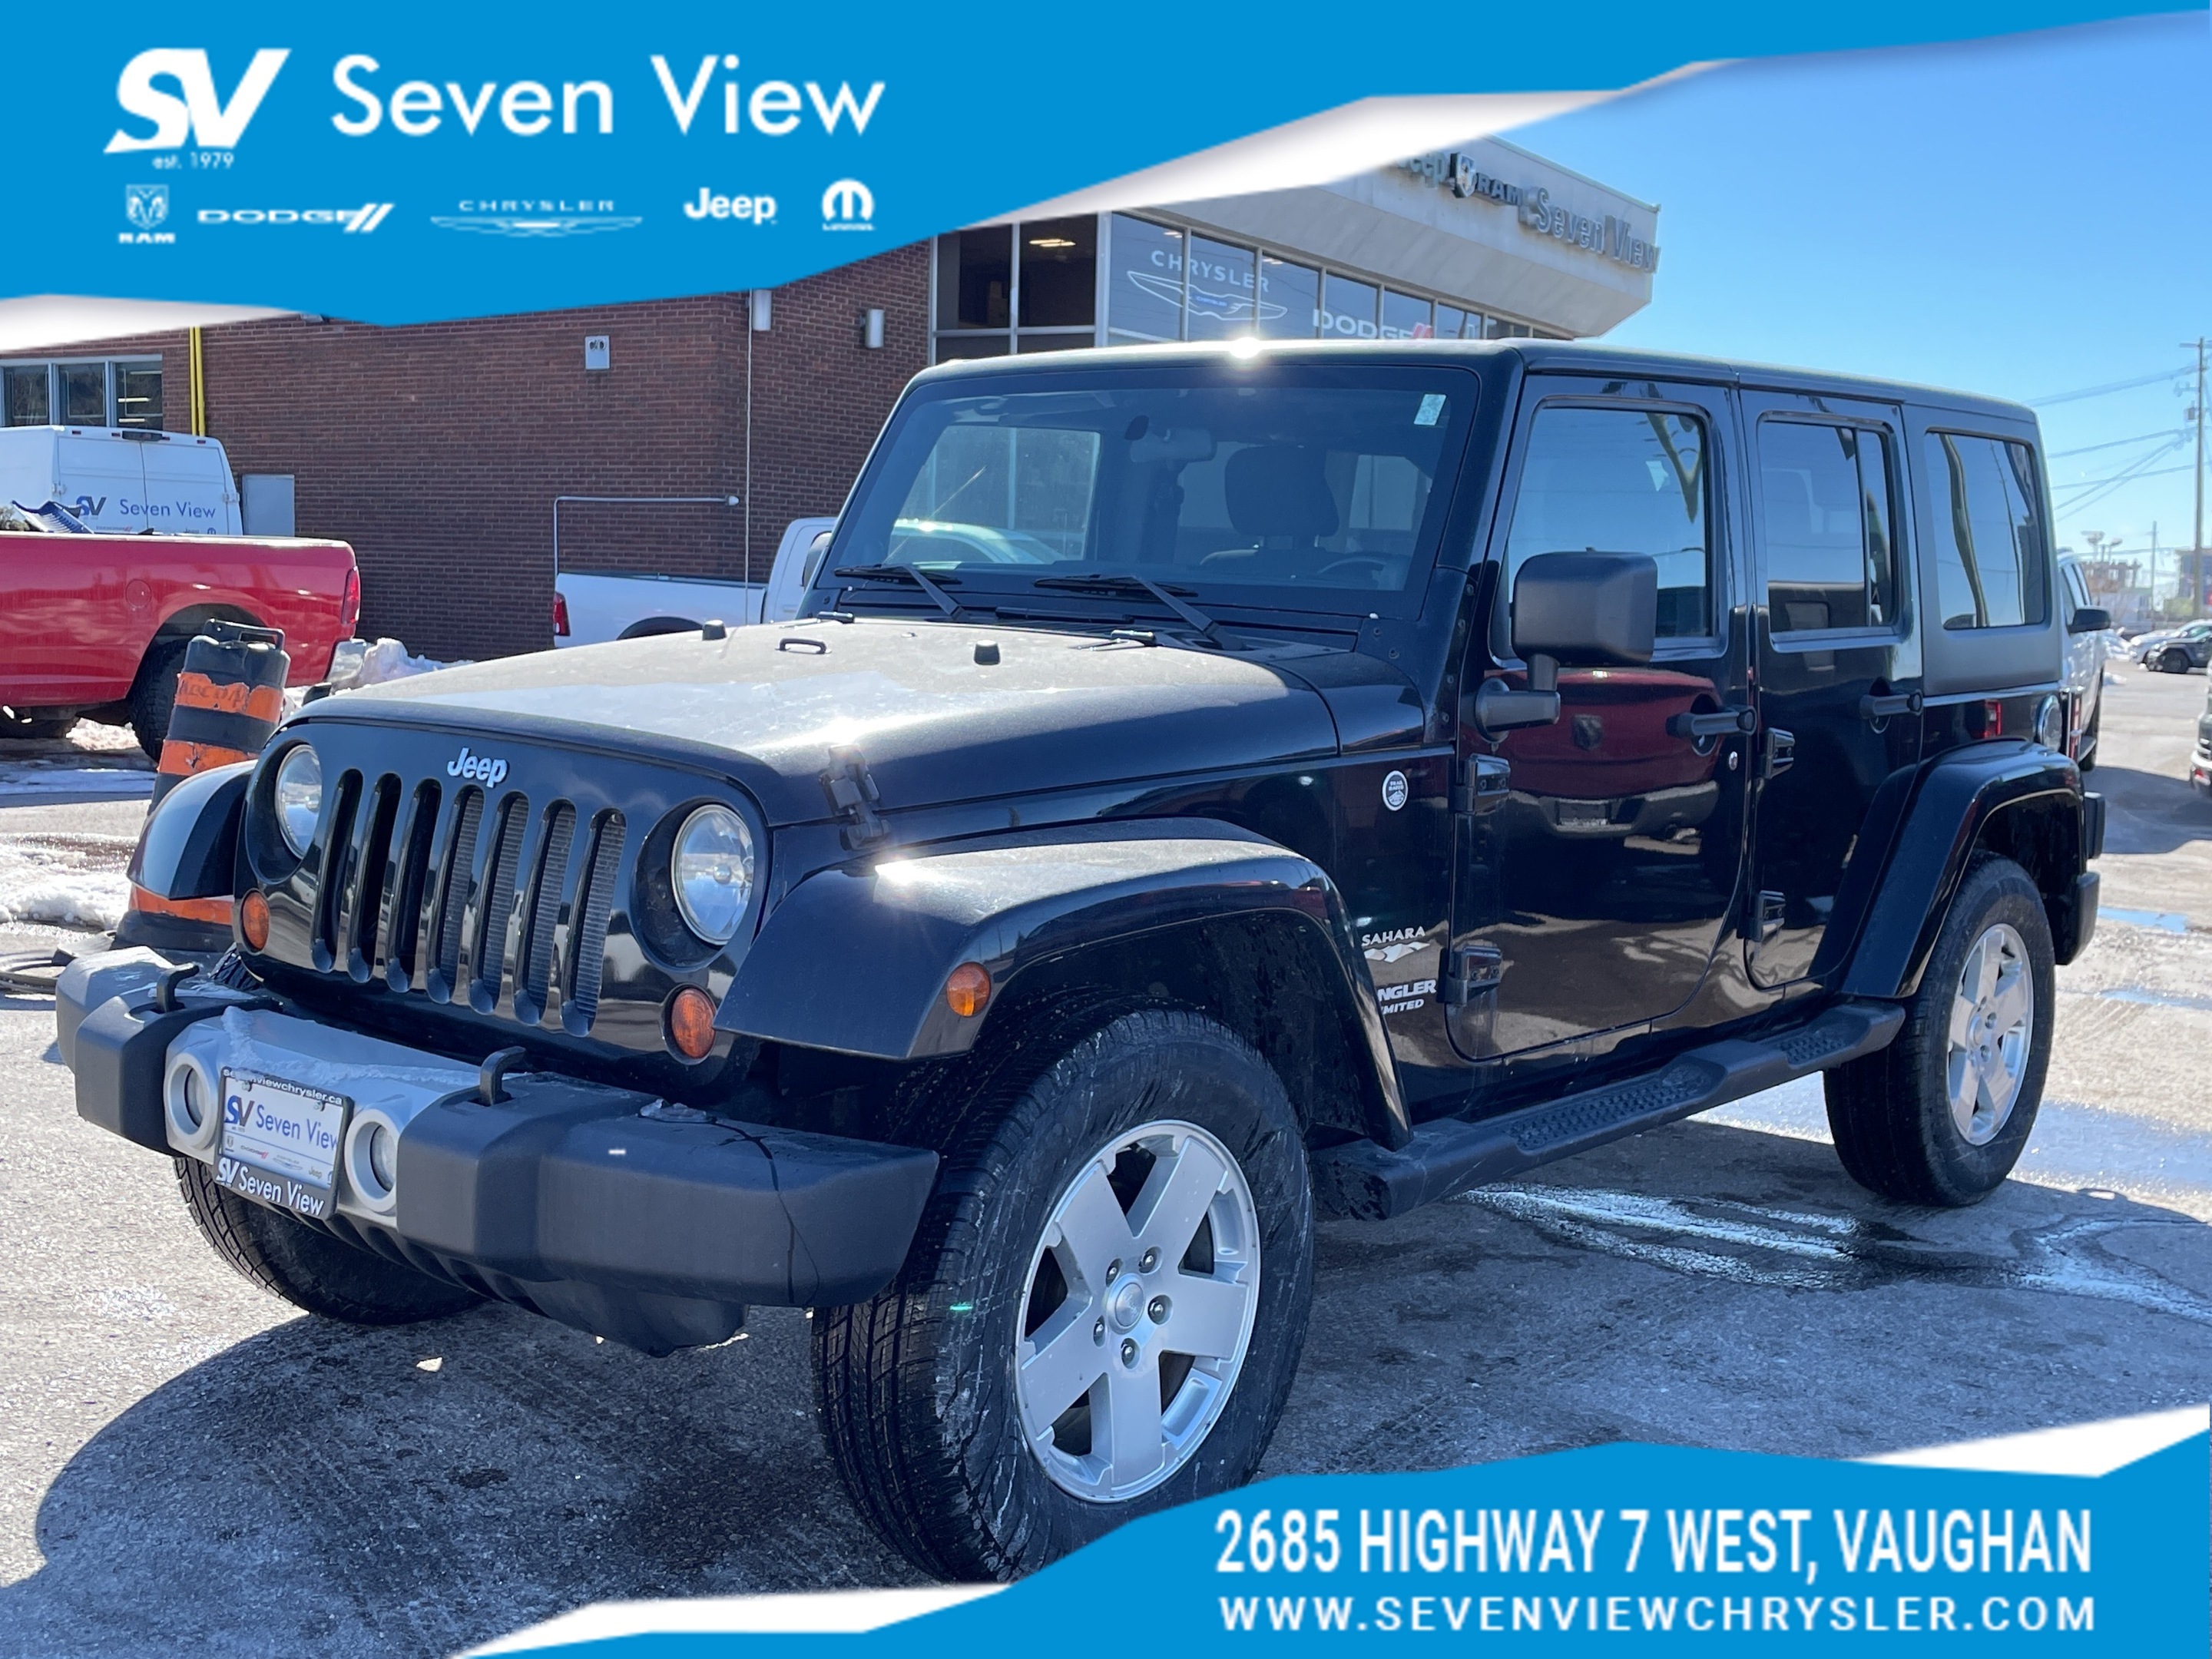 2011 Jeep WRANGLER UNLIMITED Sahara UCONNECT/REMOTE STARTER - Concord